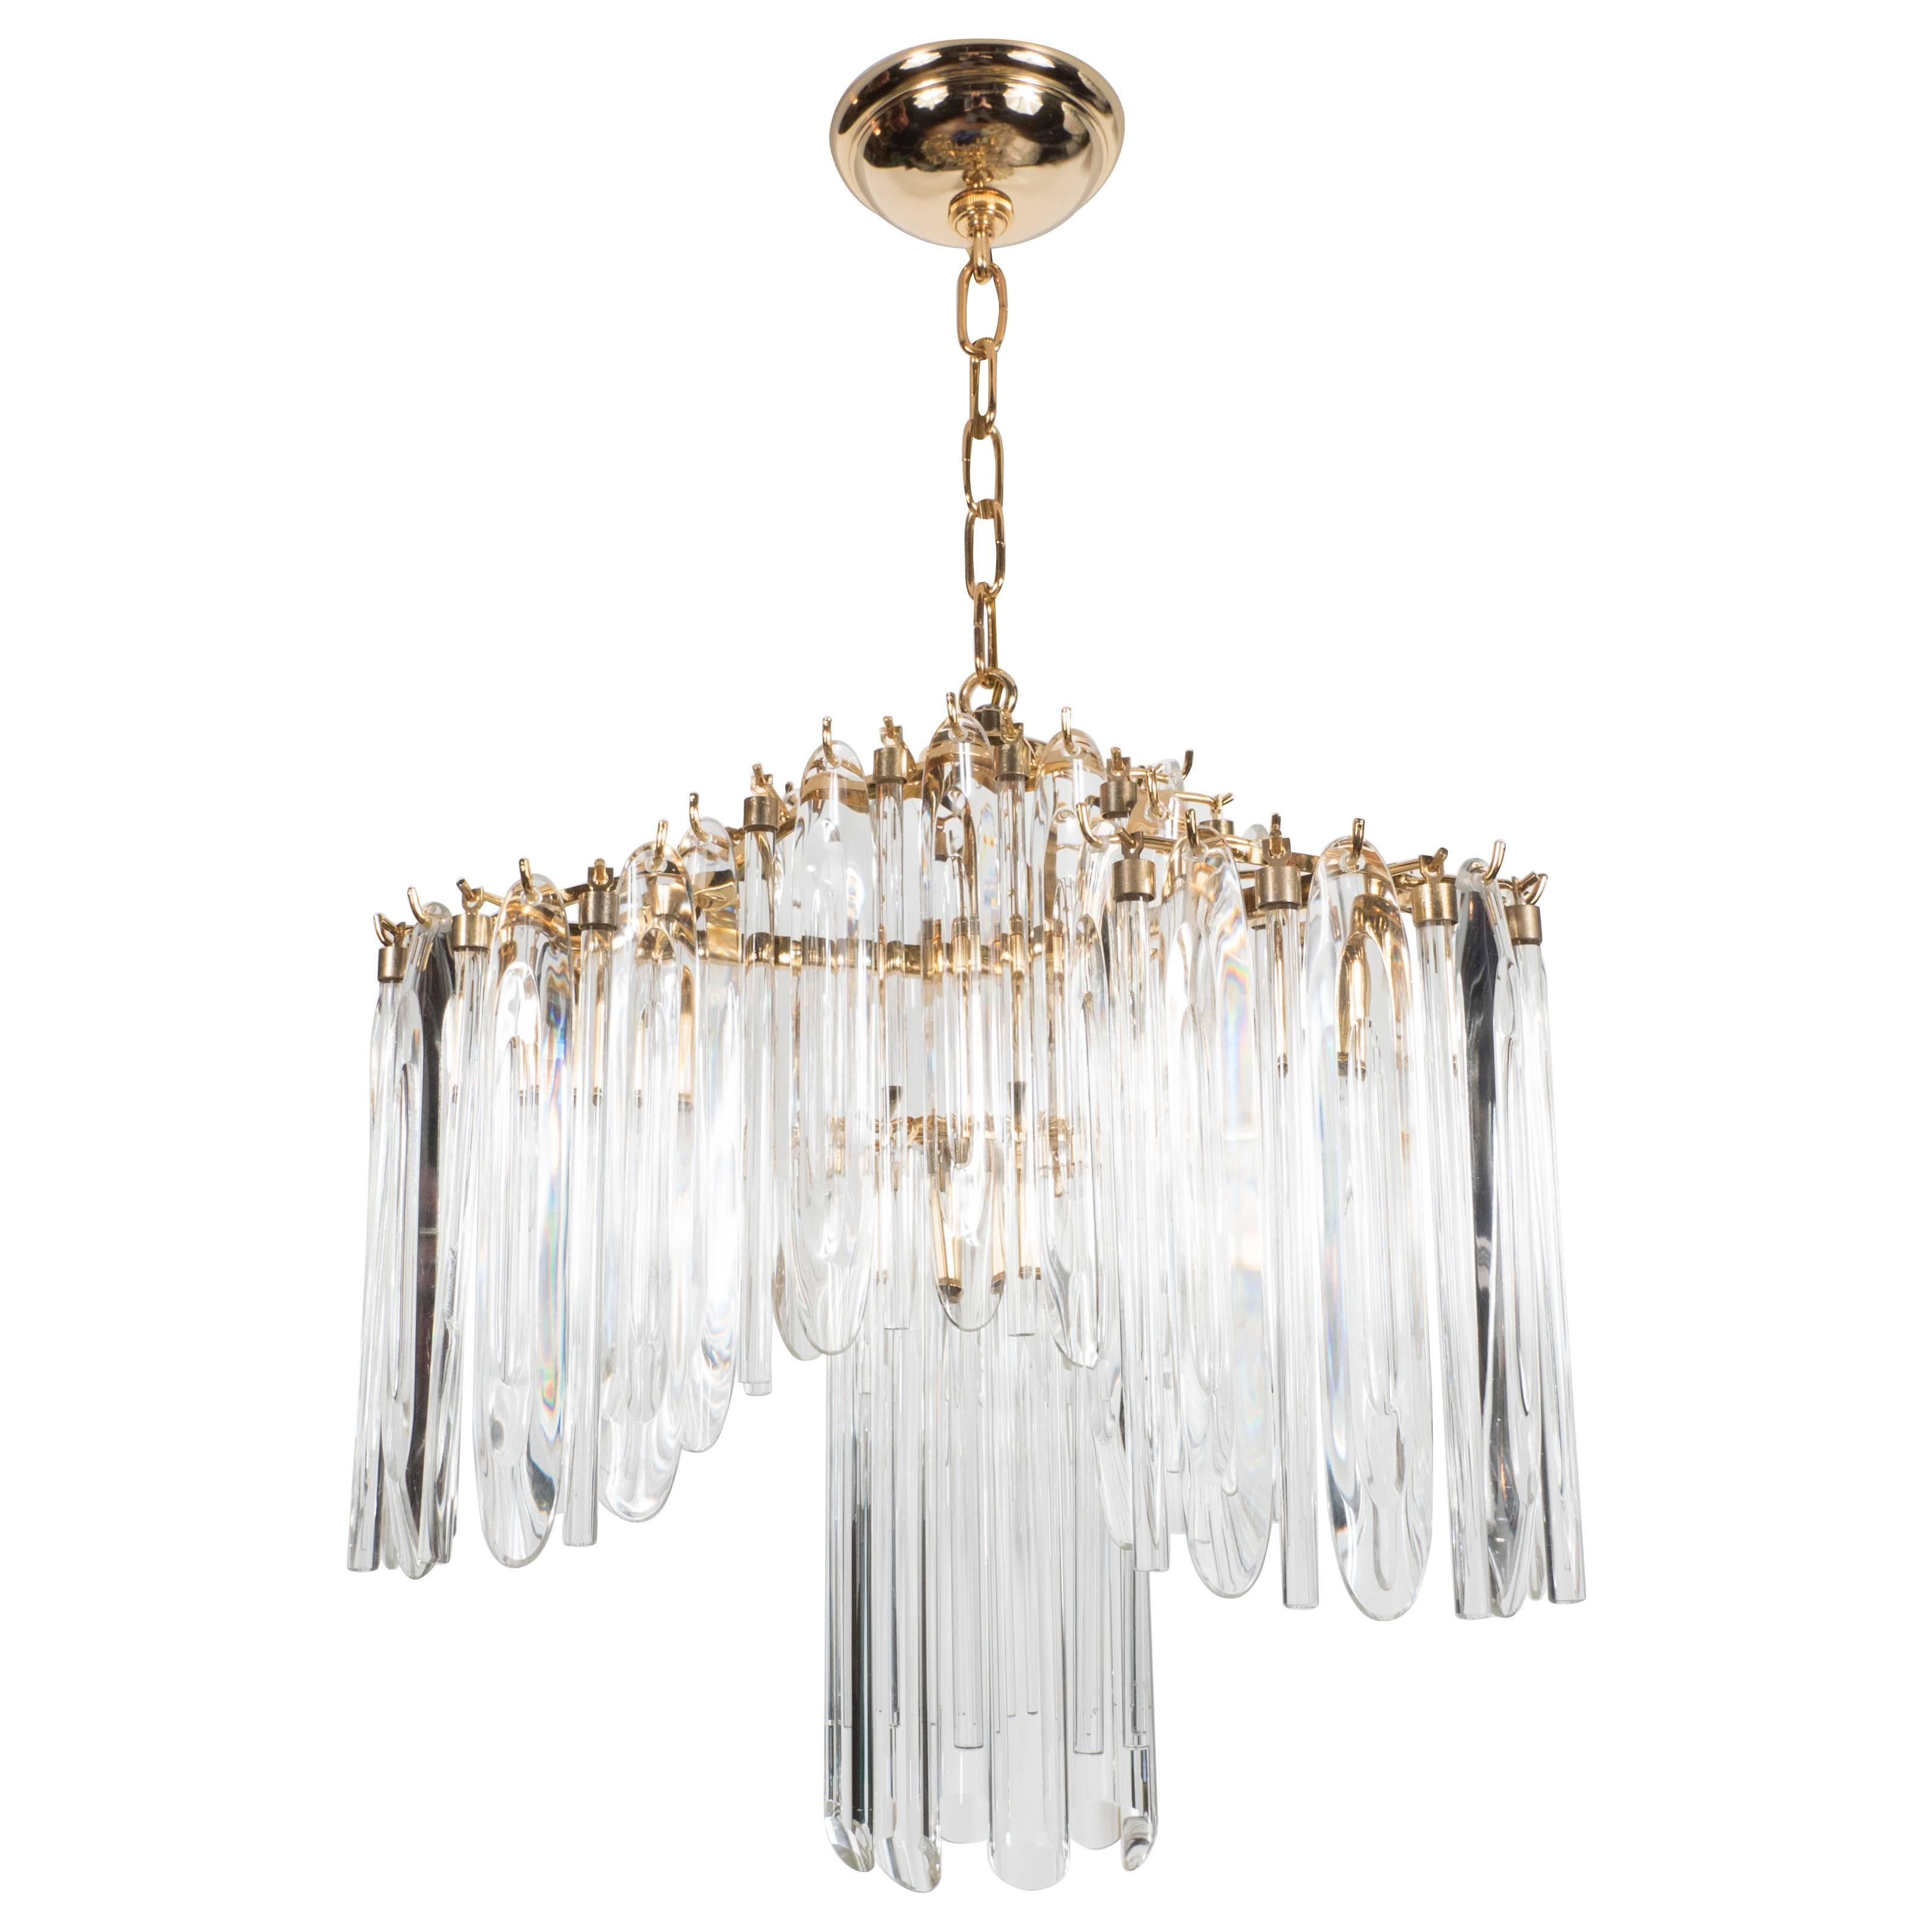 Mid-Century Draped Chandelier with 24-Karat Gold-Plated Fittings by Lobmeyr